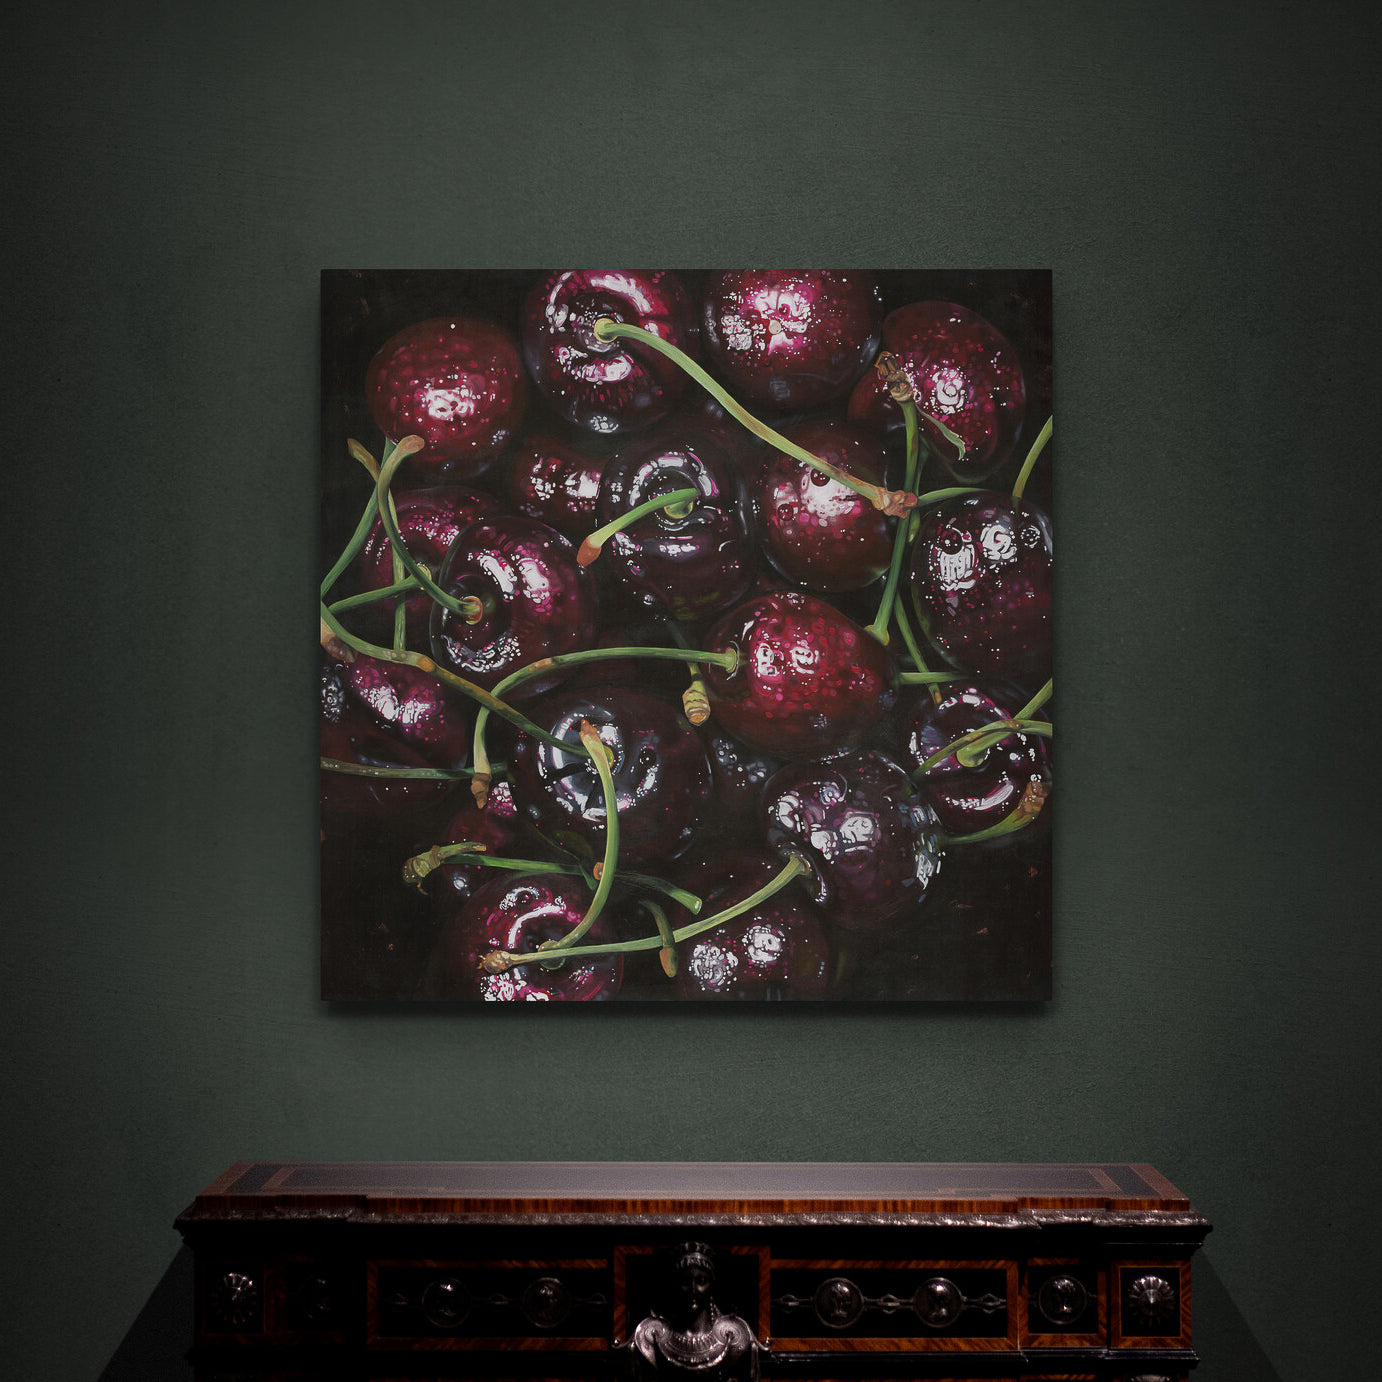 The original painting “Cherries" by Hannah Kilby from Hannah Michelle Studios, displayed as a fine art print.